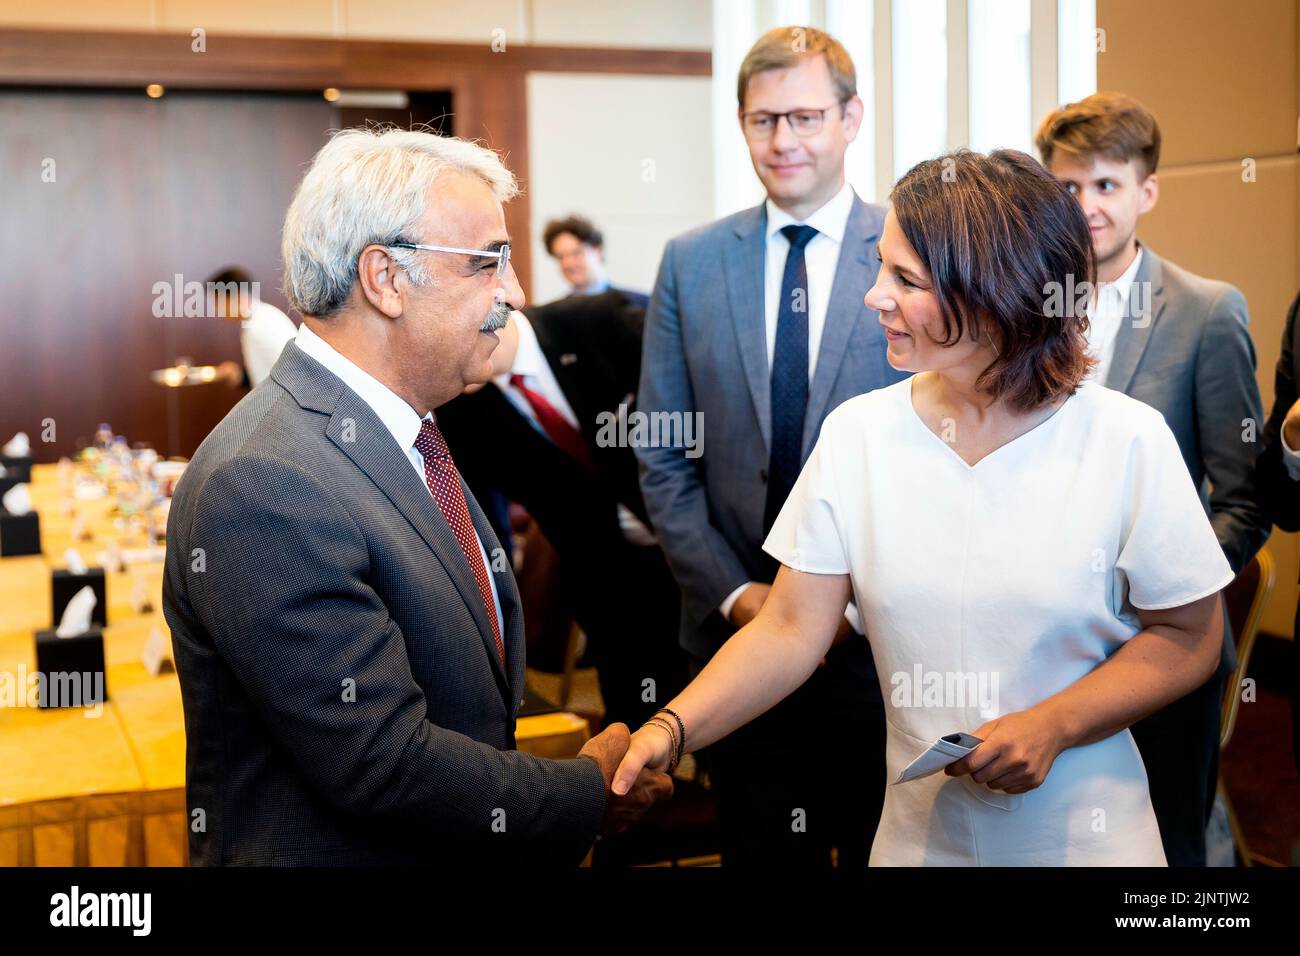 Federal Foreign Minister Annalena Baerbock meets the co-chair of the Turkish party HDP, withhat Sancar for talks in Ankara, July 30, 2022. Copyright: Leon Kuegeler/photothek.de Stock Photo